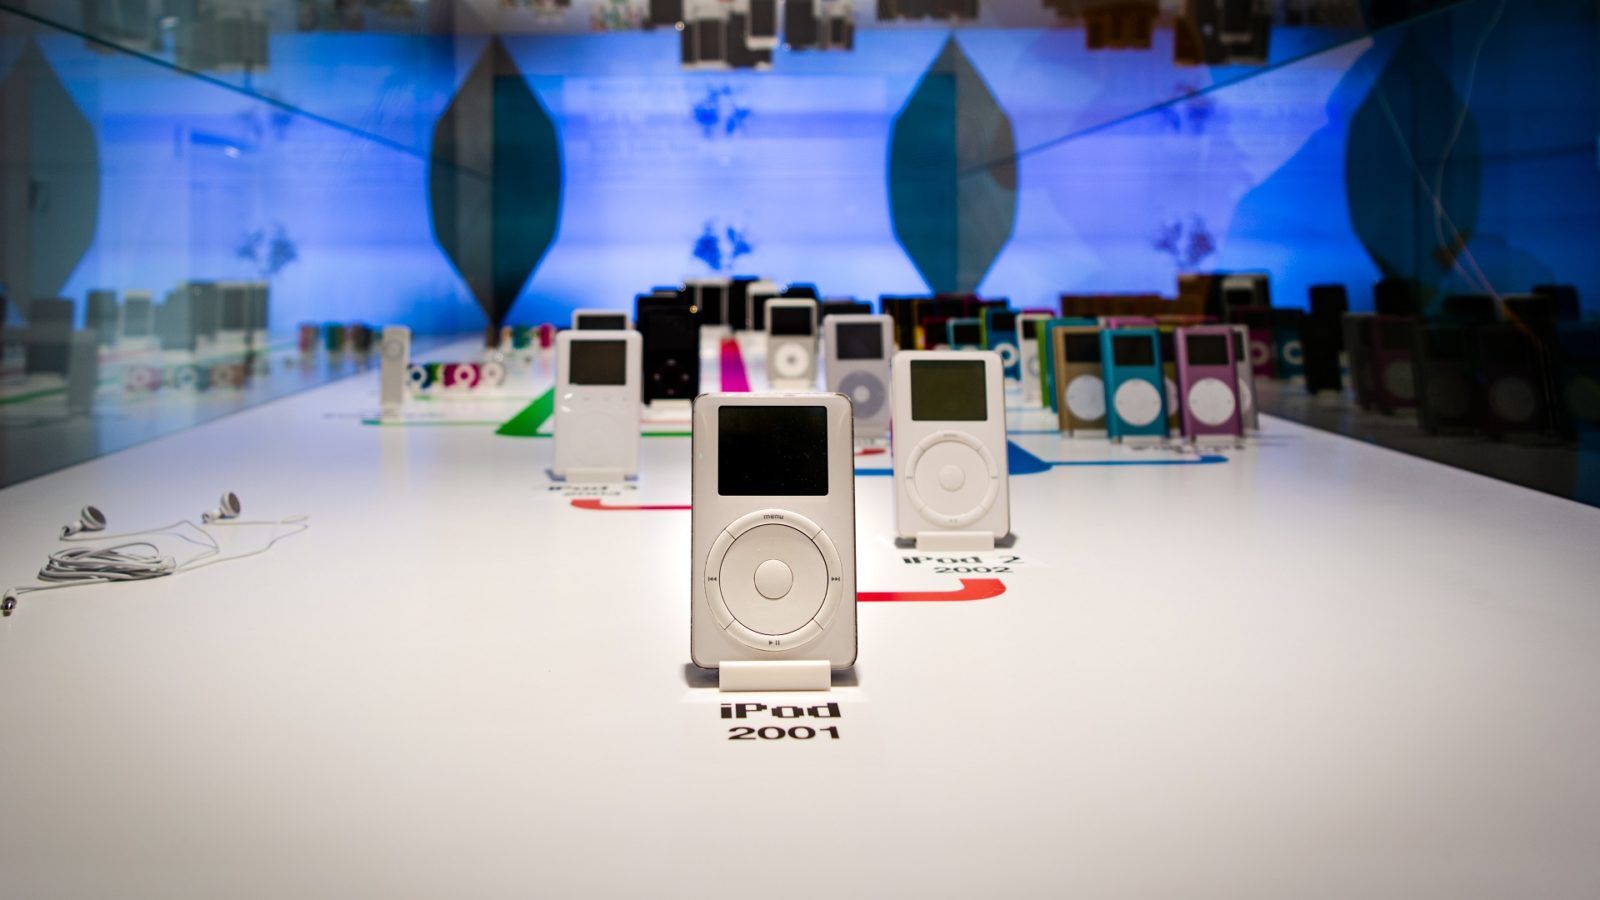 End of an era: Apple to discontinue the iPod after 21 years